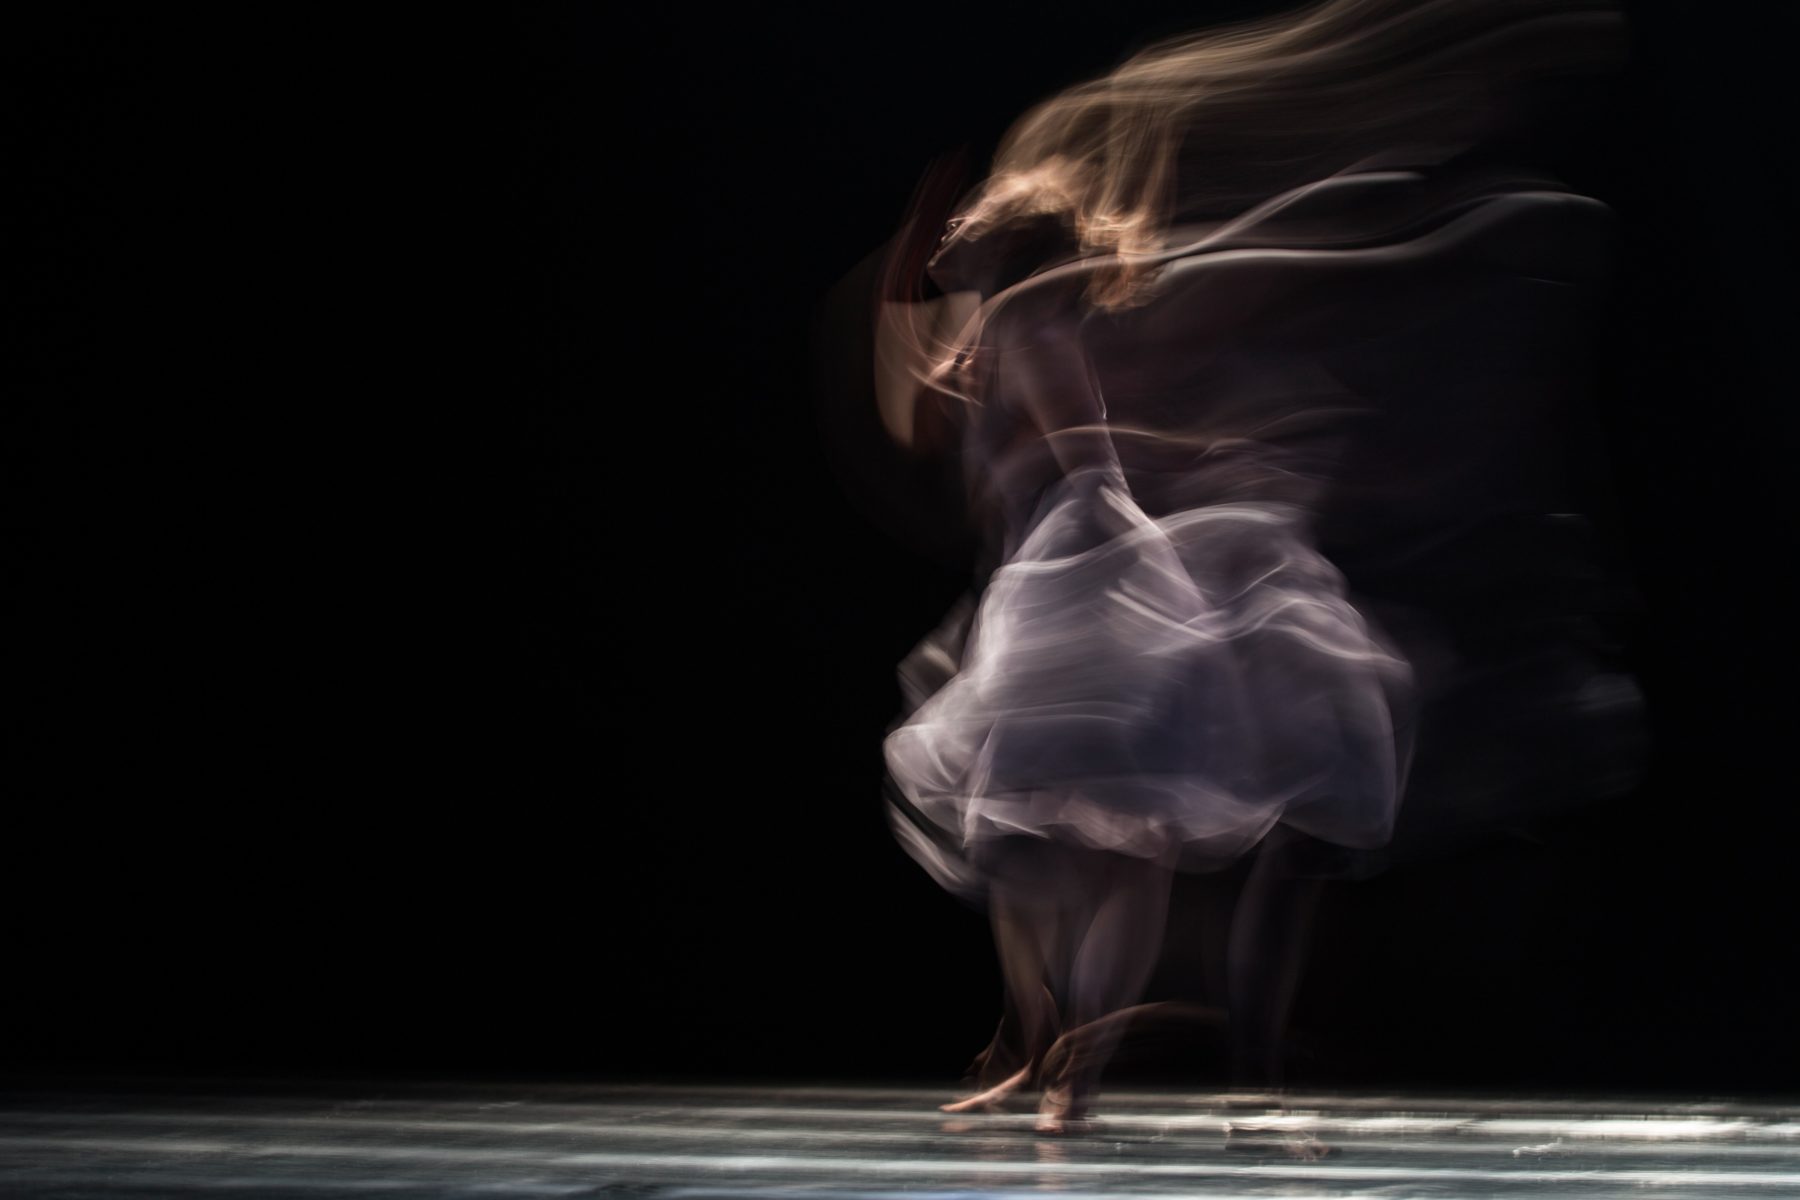 Image of a dancer caught mid-turn